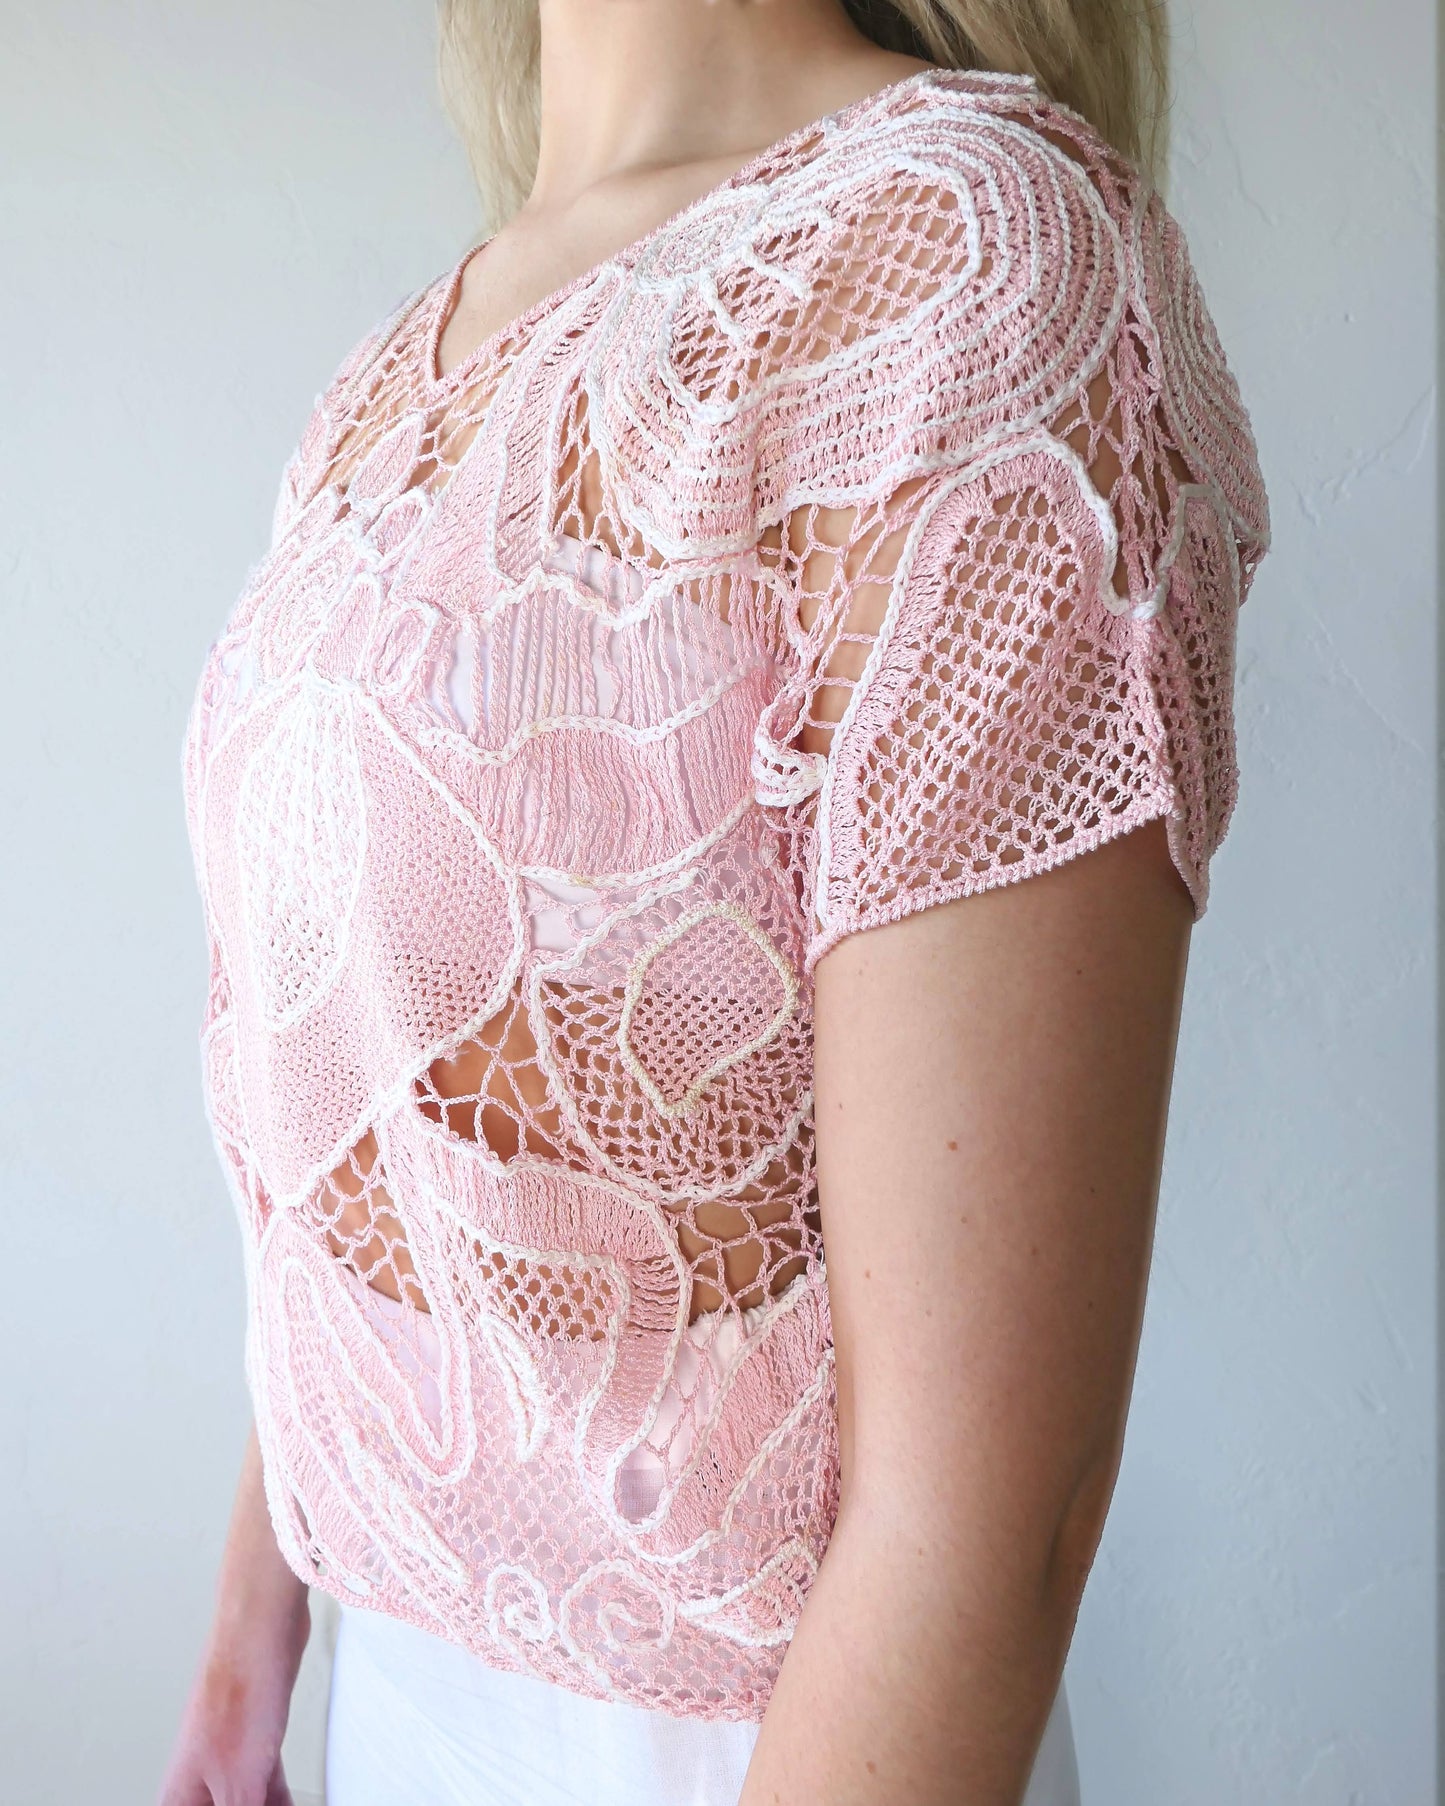 Close-up side view of girl wearing a crochet top with abstract flora design in colors of cotton candy pink and white. Lim's Vintage original crochet top from the 1980s.